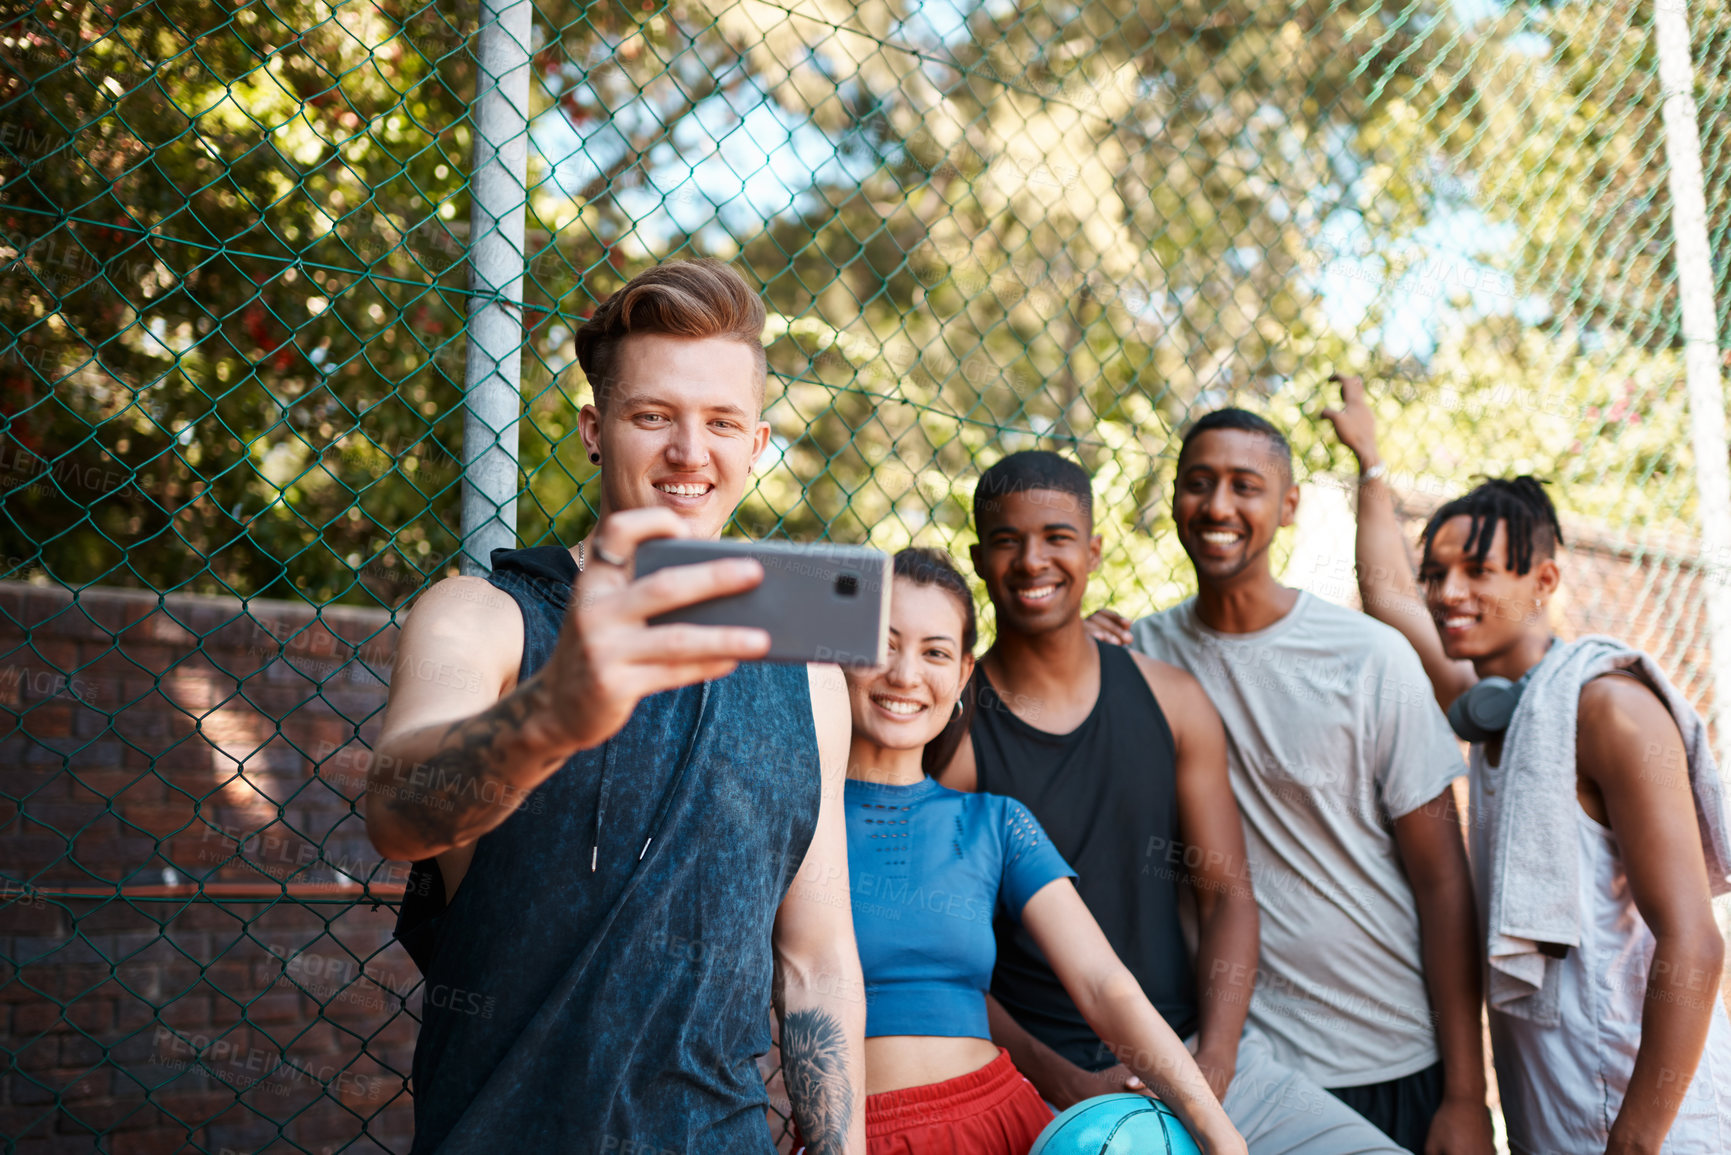 Buy stock photo Shot of a group of sporty young people taking selfies together outdoors